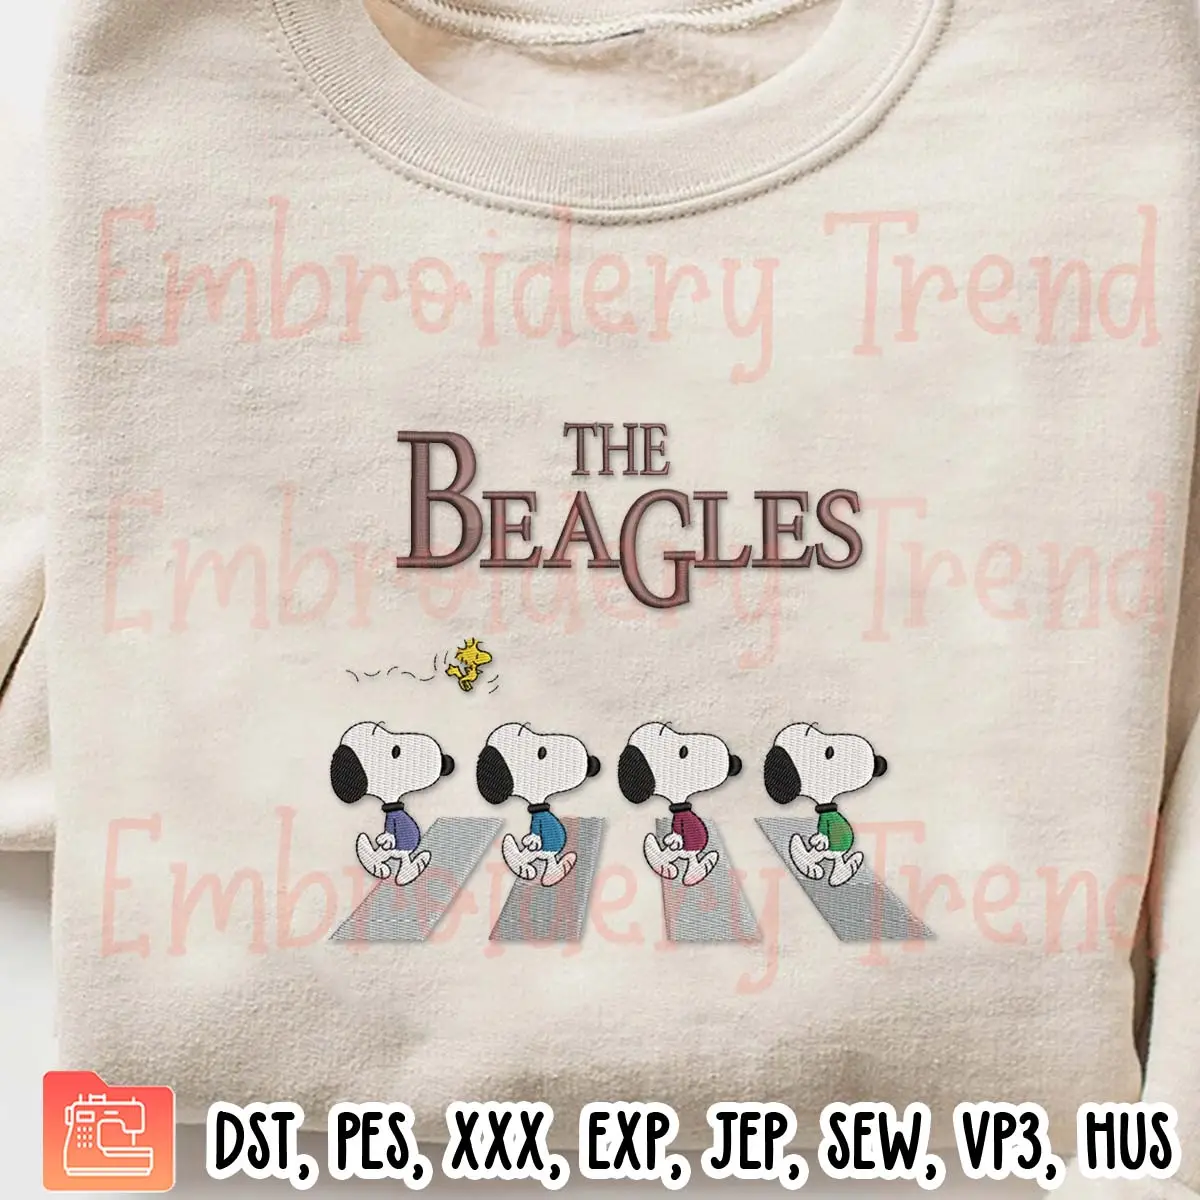 The Beagles Abbey Road Snoopy Embroidery Design, Peanuts Snoopy Embroidery Digitizing Pes File